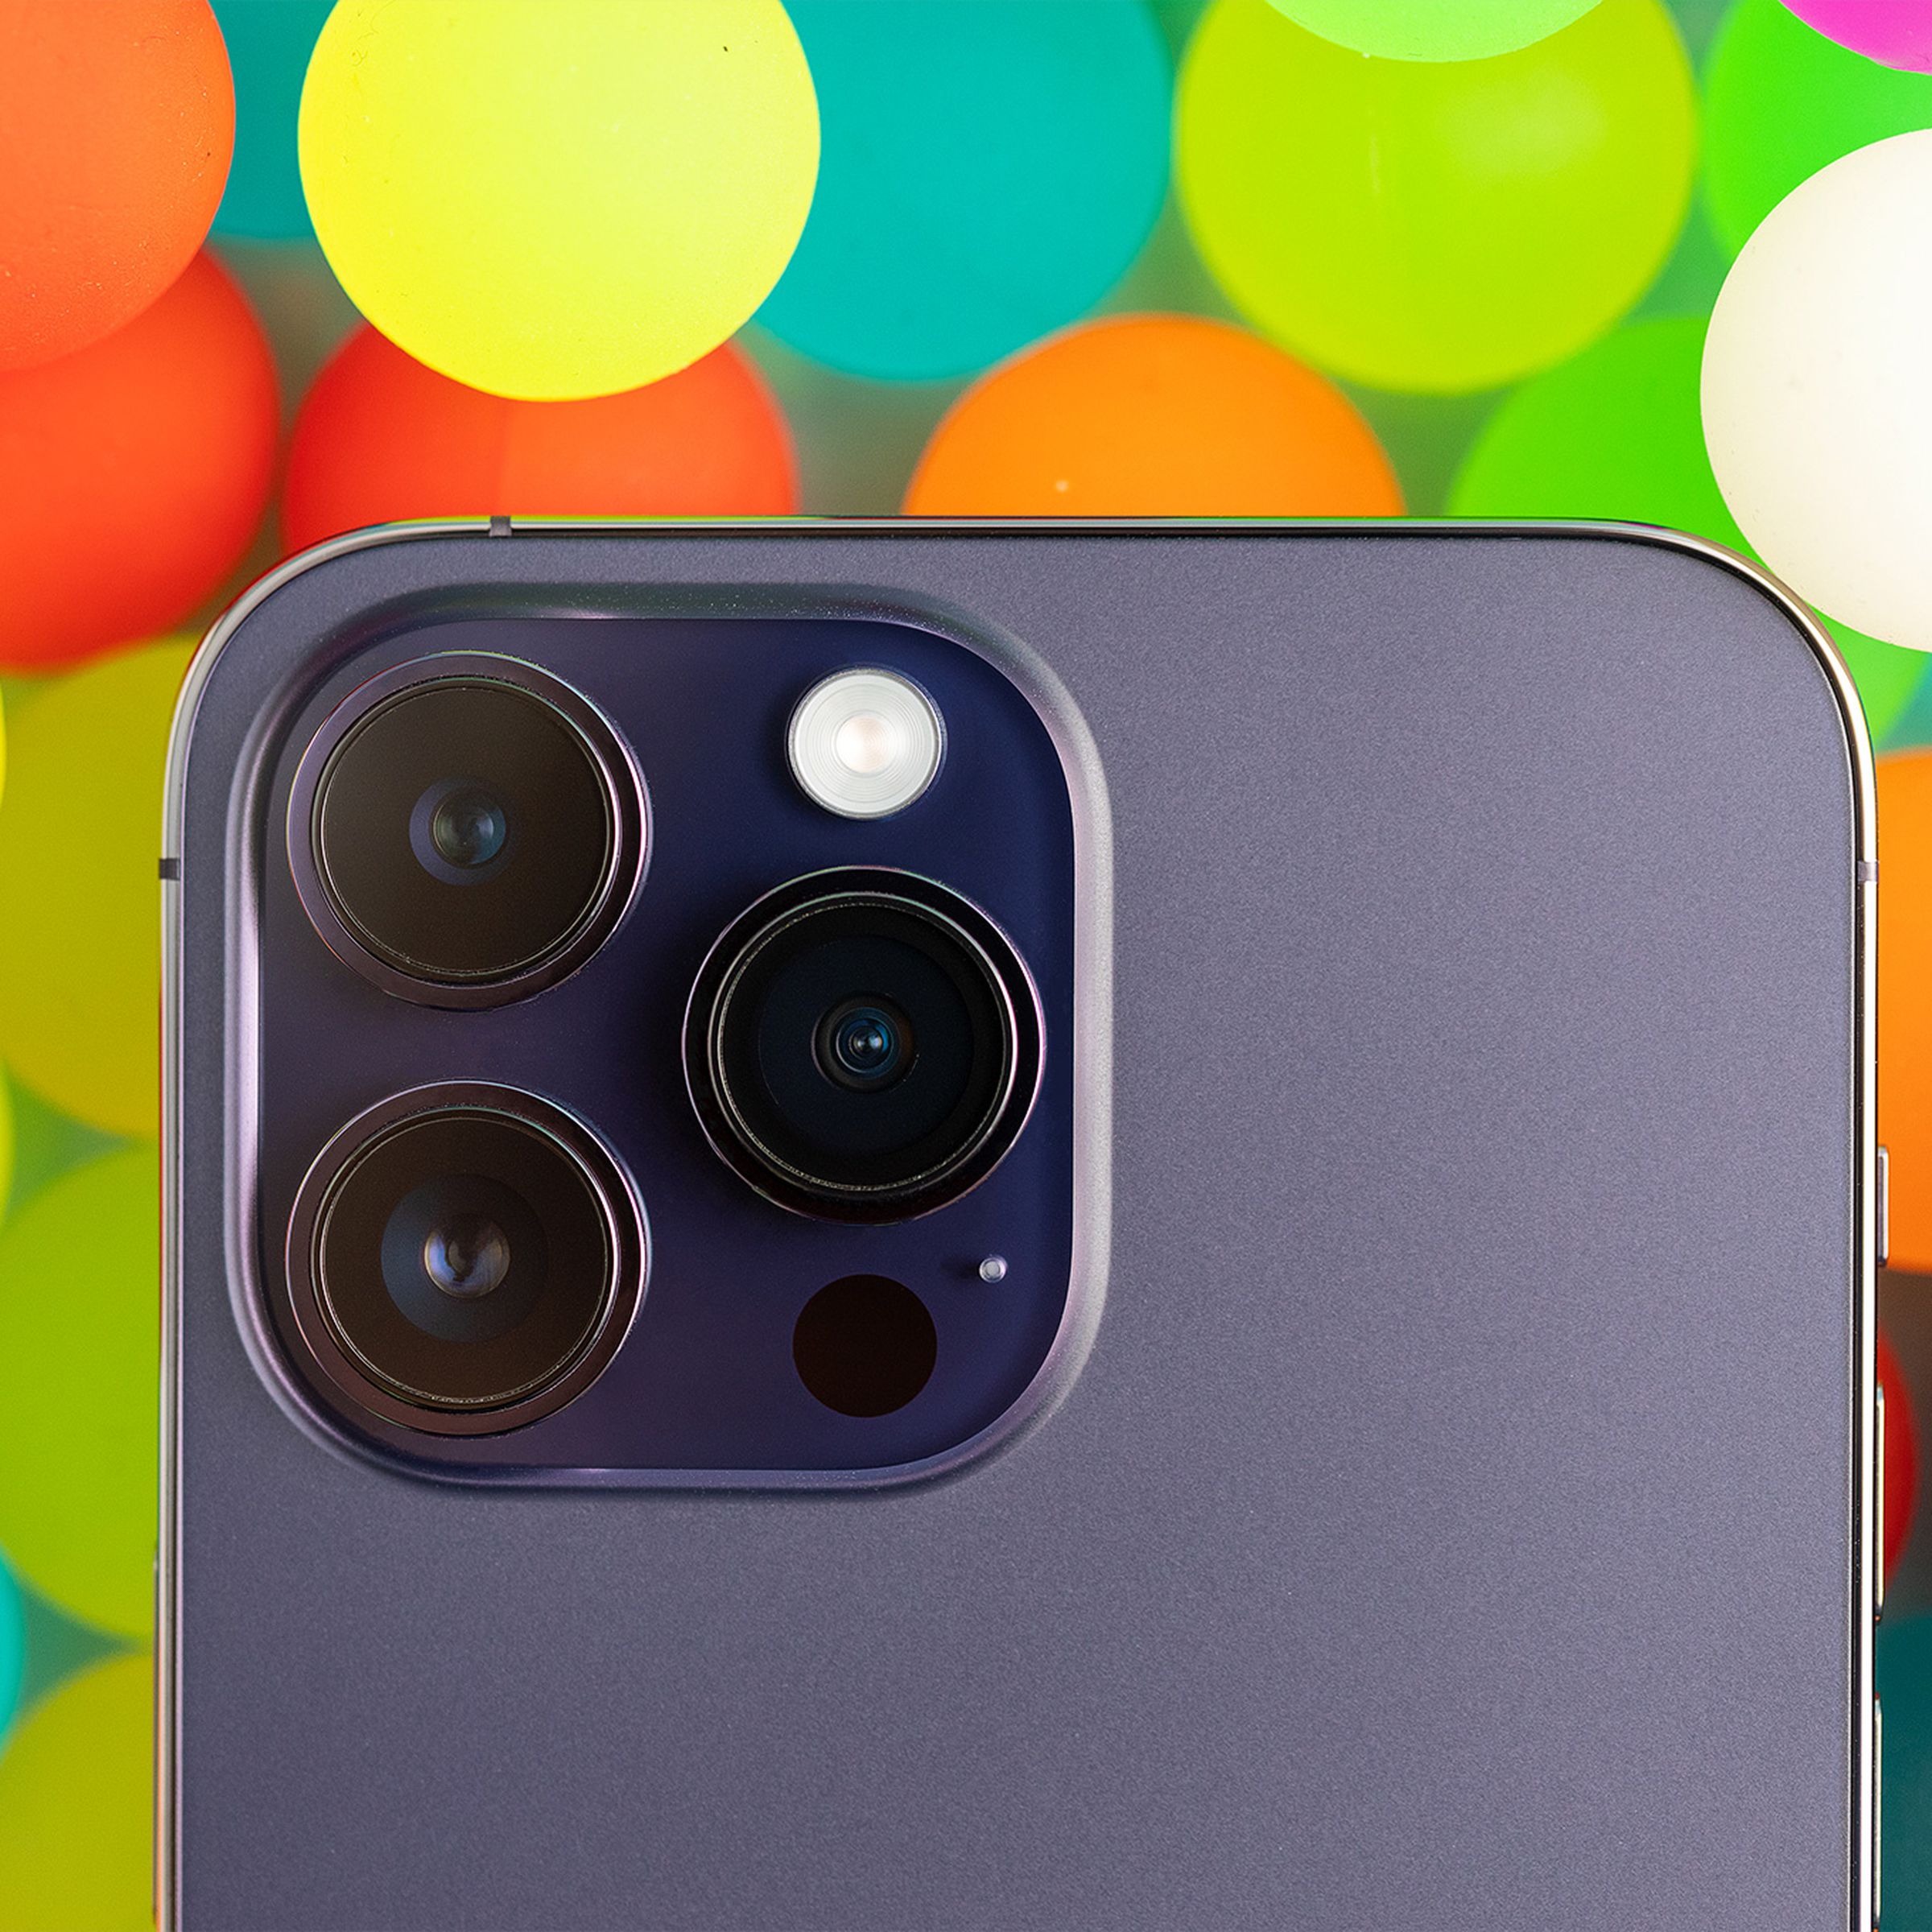 A close-up of the iPhone 14 Pro's camera module against a background of translucent colorful balls.